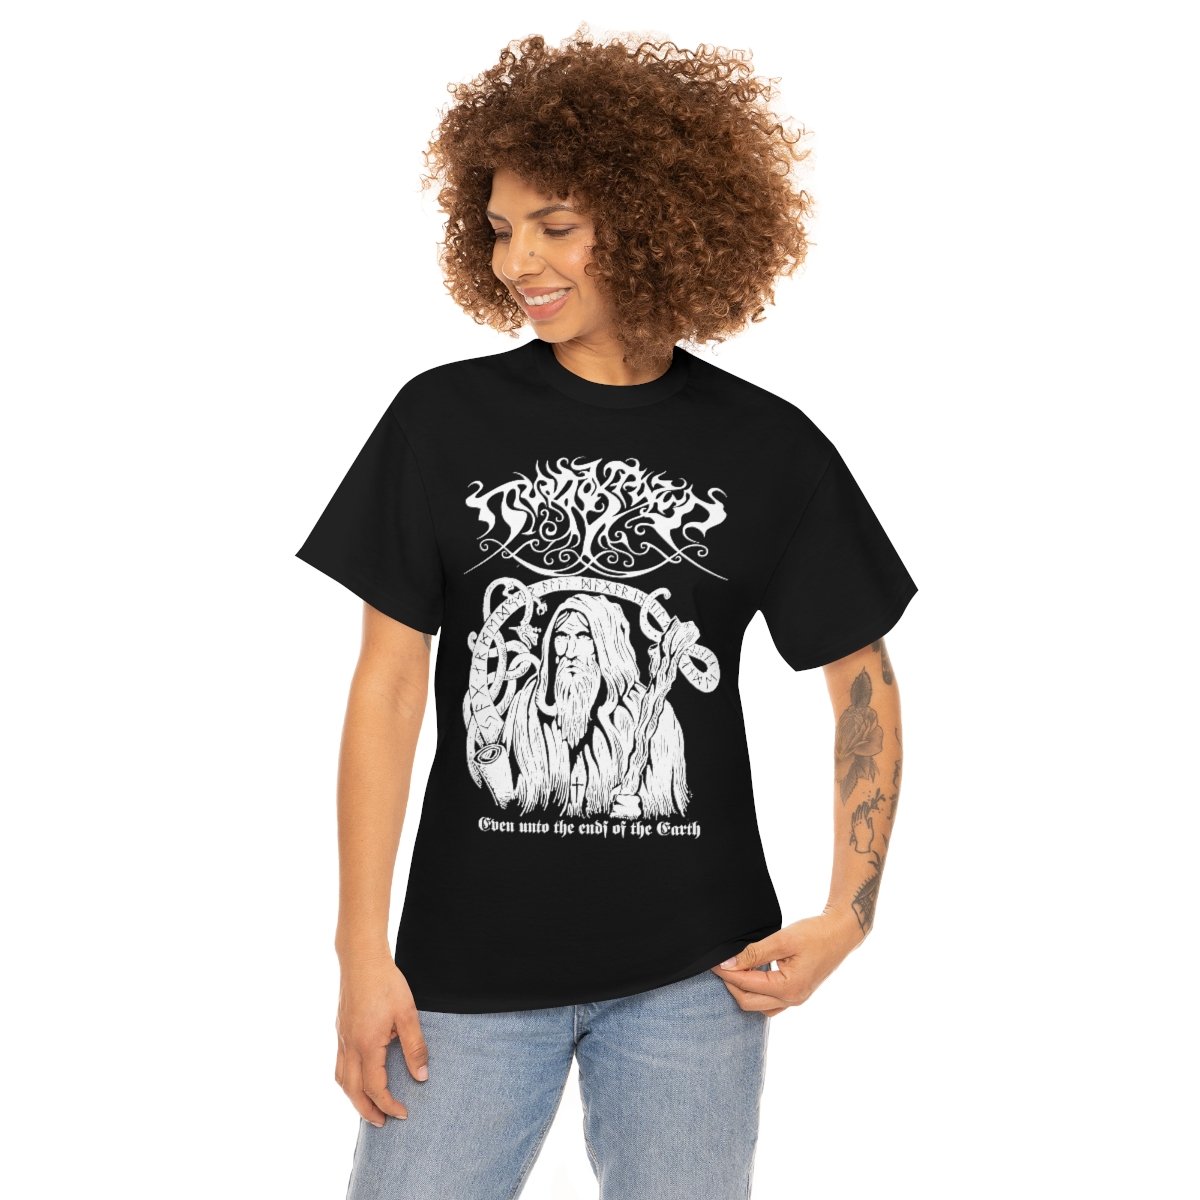 Pantokrator – Even Unto the Ends of the Earth Short Sleeve Tshirt (5000)